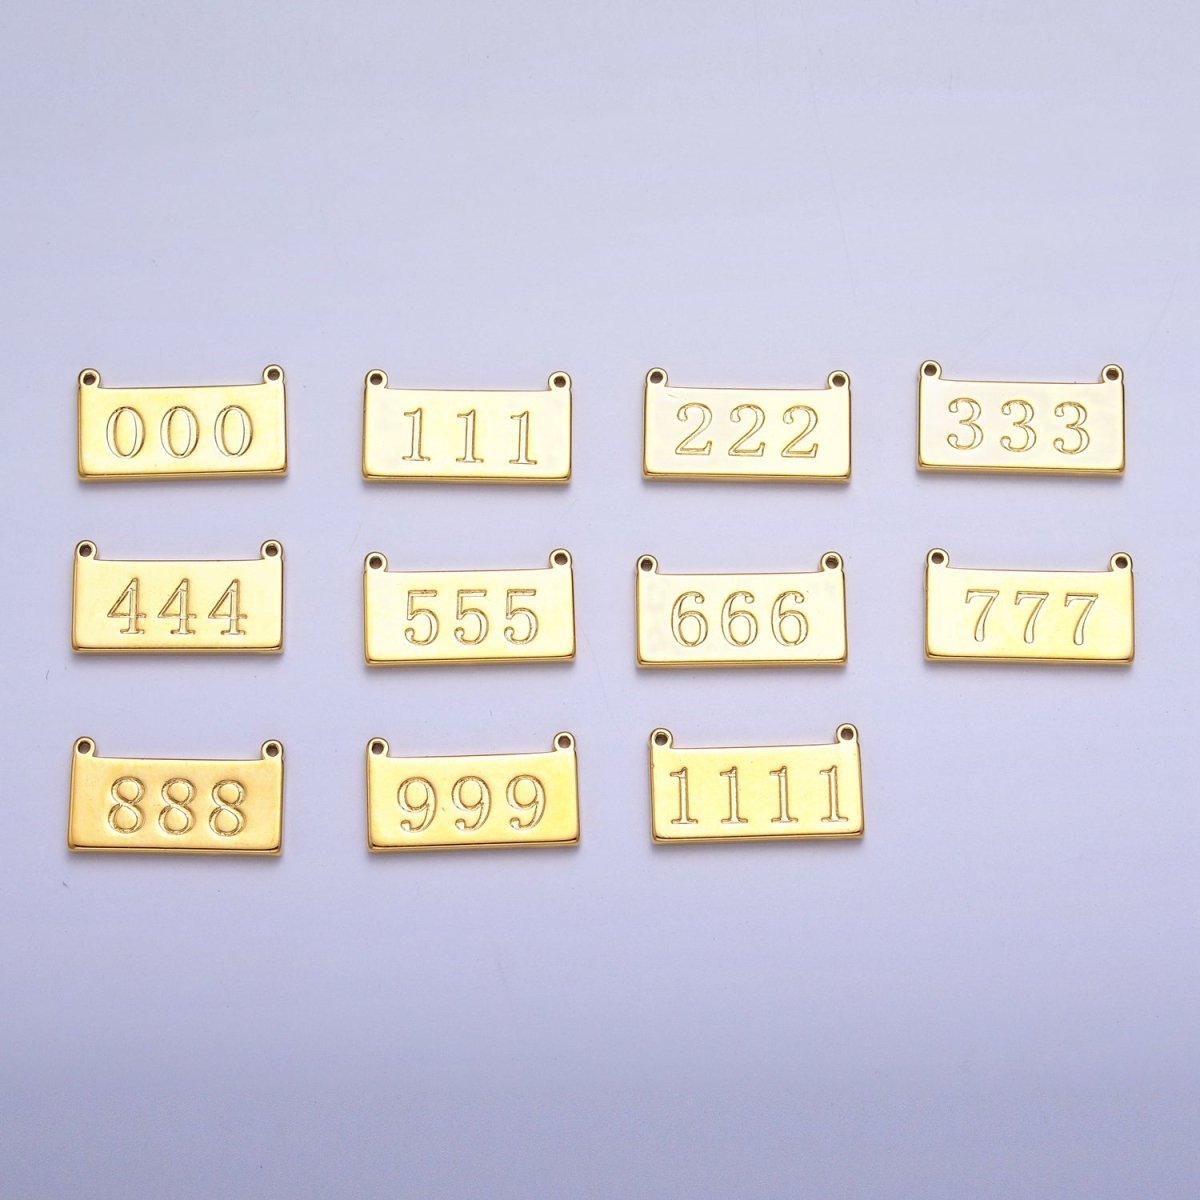 24K Gold Filled Angel Number Numerology Engraved Rectangular Tag Charm Connector | AA791 - AA800 - DLUXCA